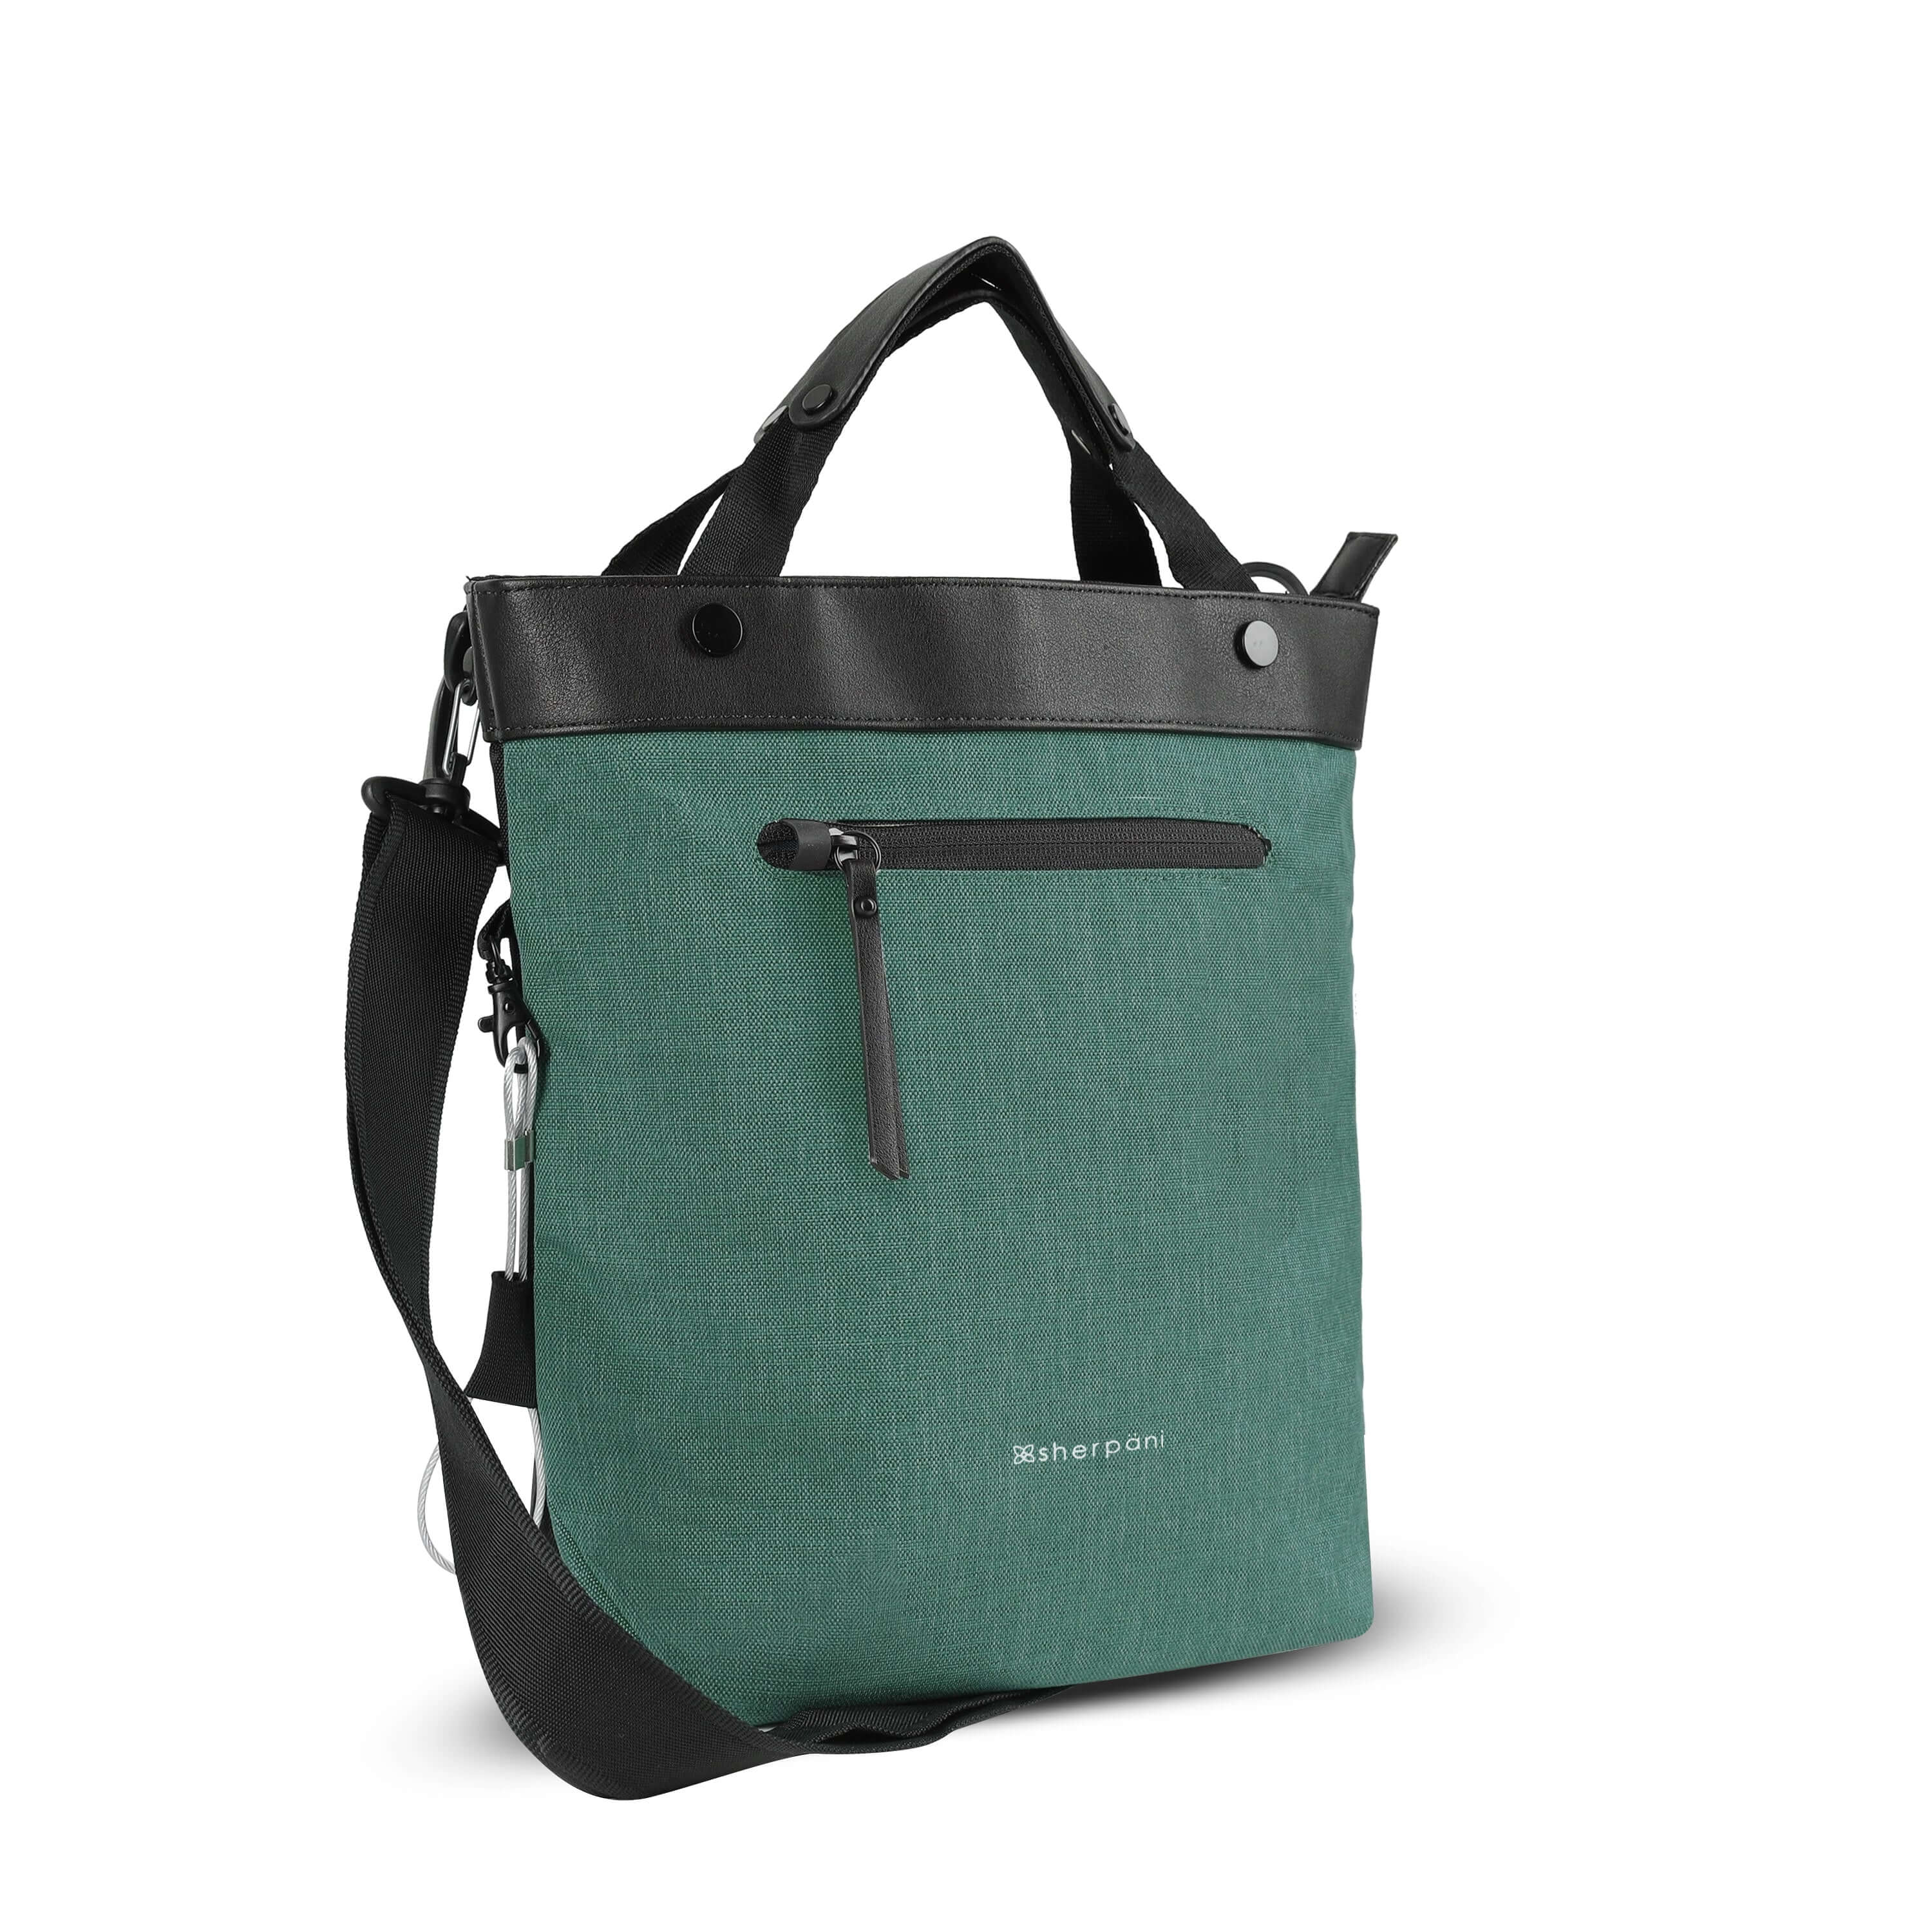 Angled front view of Sherpani&#39;s Anti-Theft bag, the Geo AT in Teal, with vegan leather accents in black. The bag features short tote handles and an adjustable/detachable crossbody strap. There is a locking zipper compartment on the front. A chair loop lock is clipped to the side and secured in place by an elastic tab.